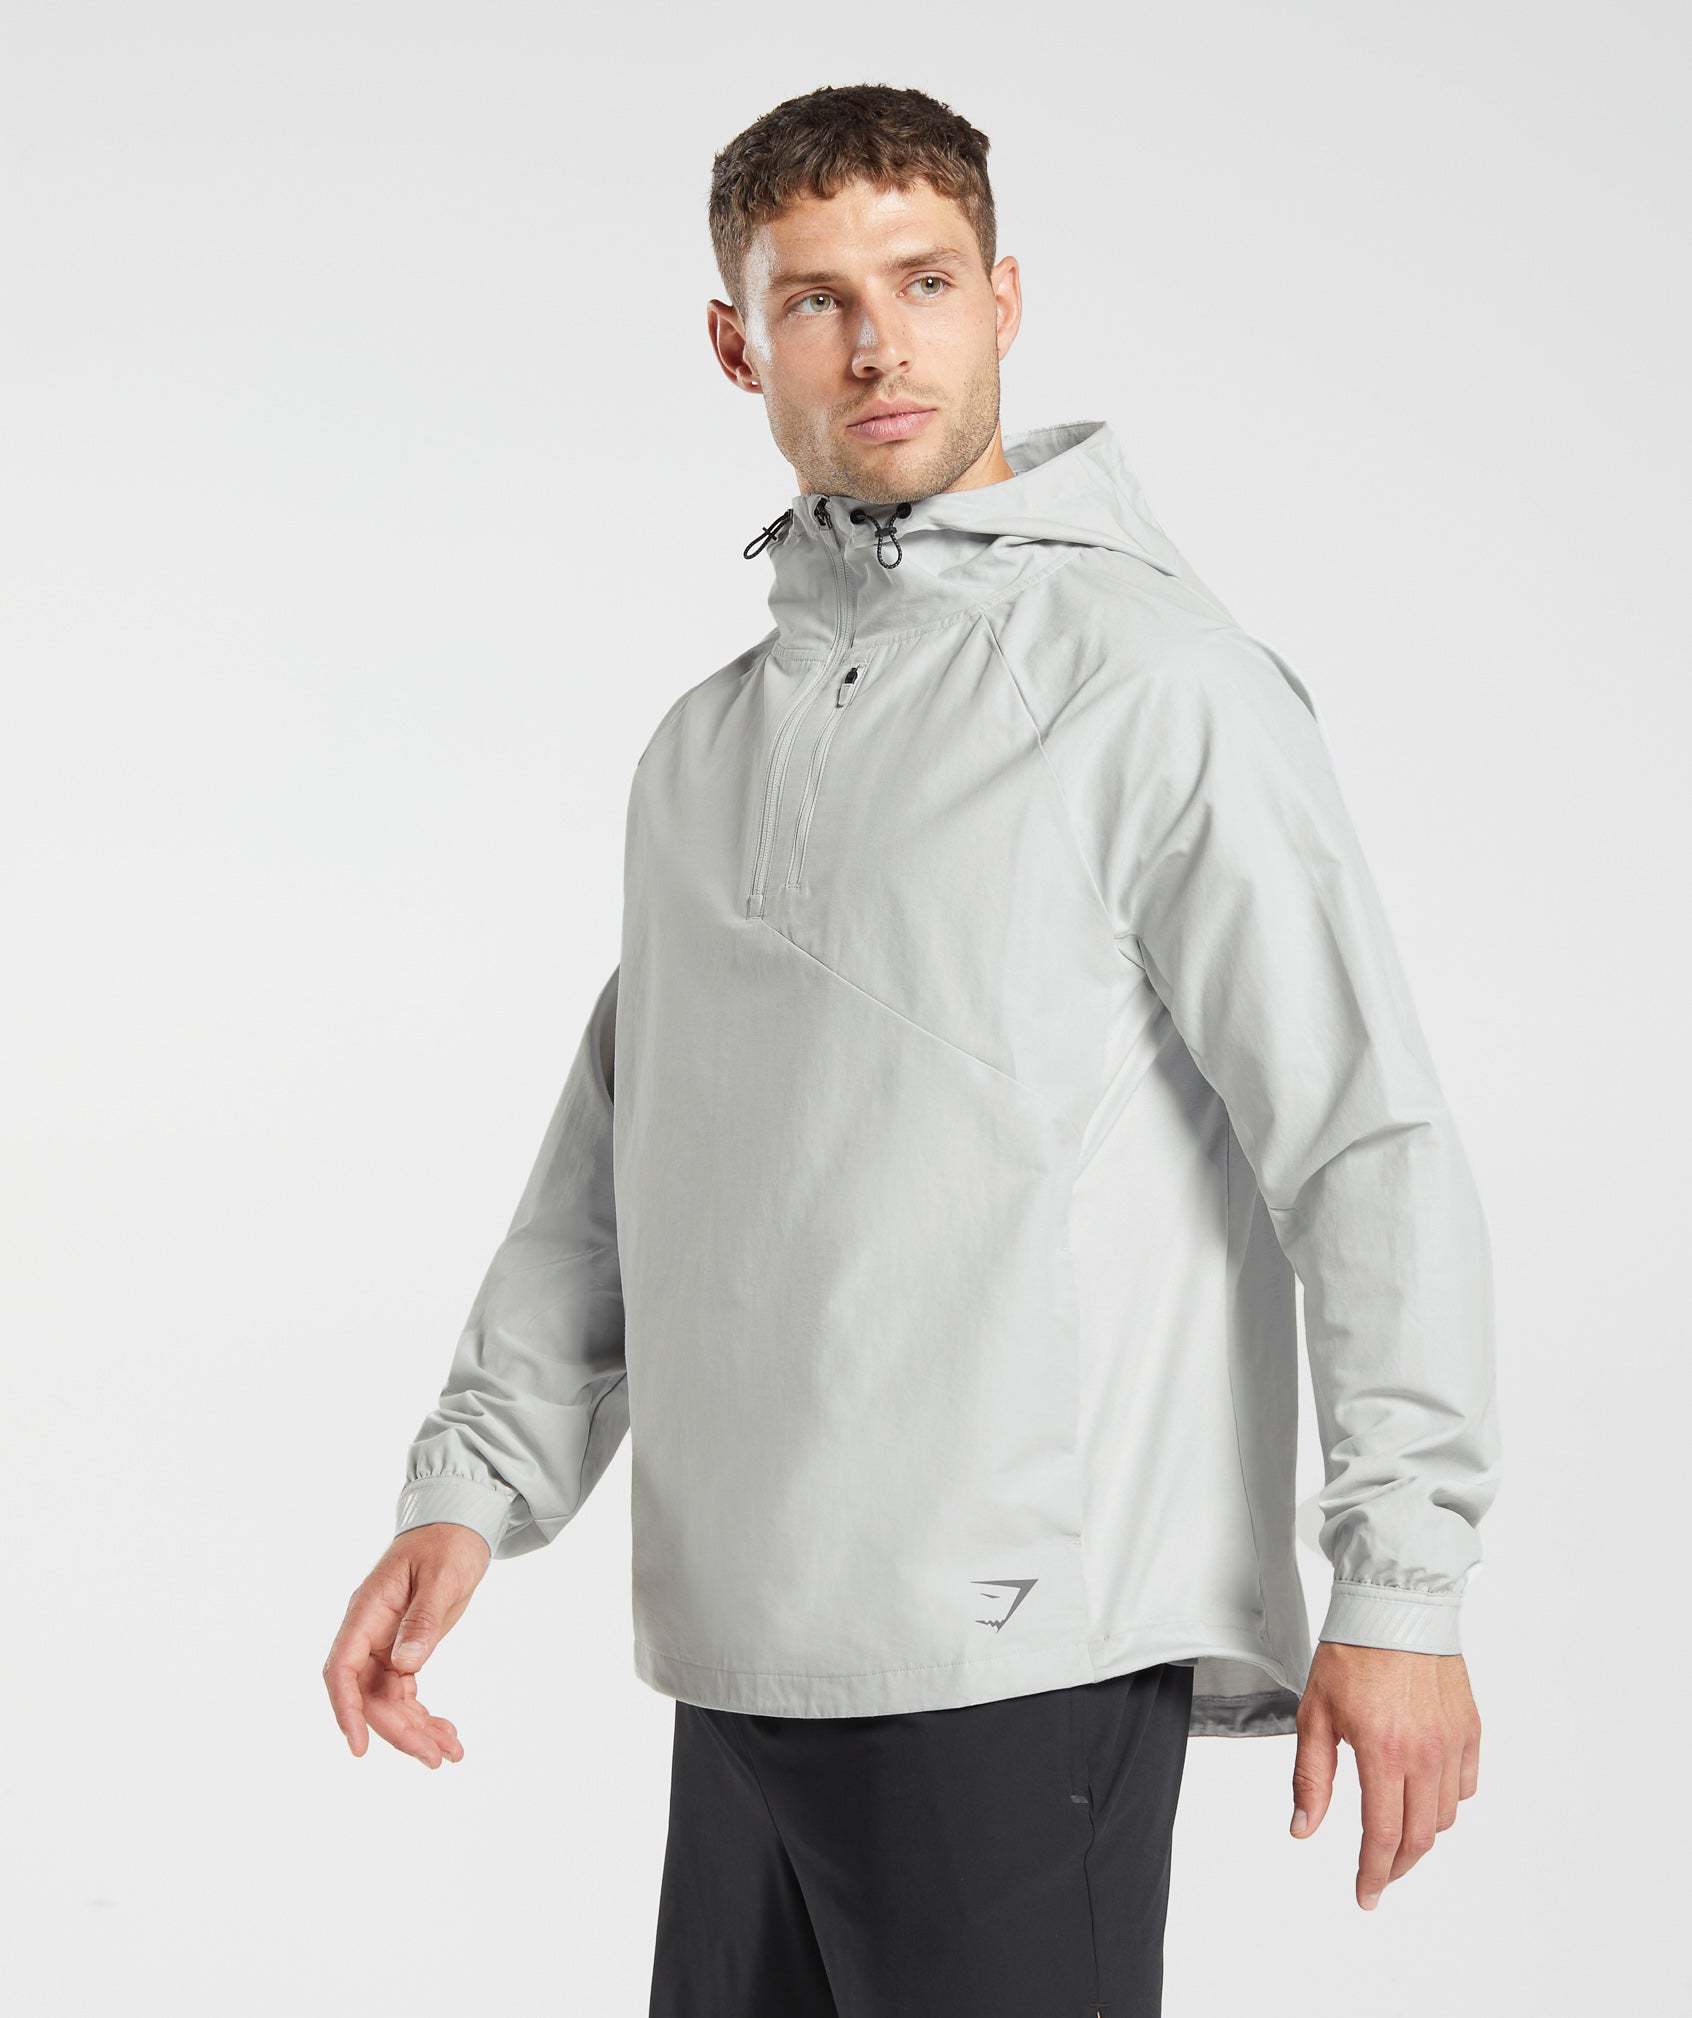 Apex Jacket in Light Grey - view 3